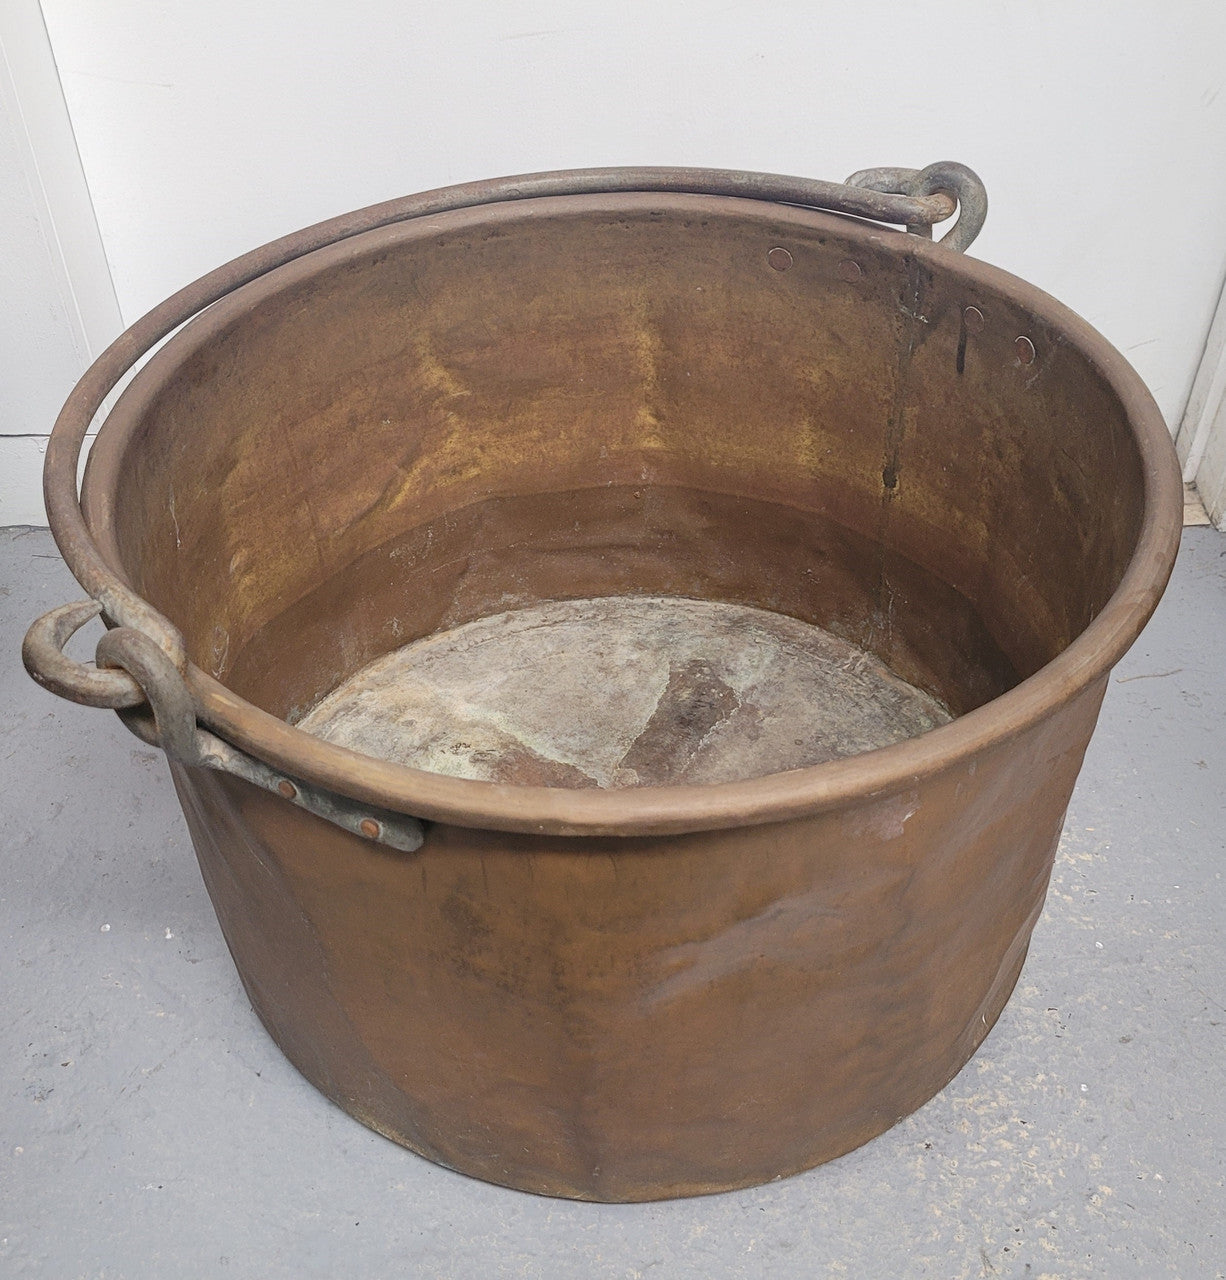 Large Antique French copper pot with wrought iron handle. It is in good original condition.